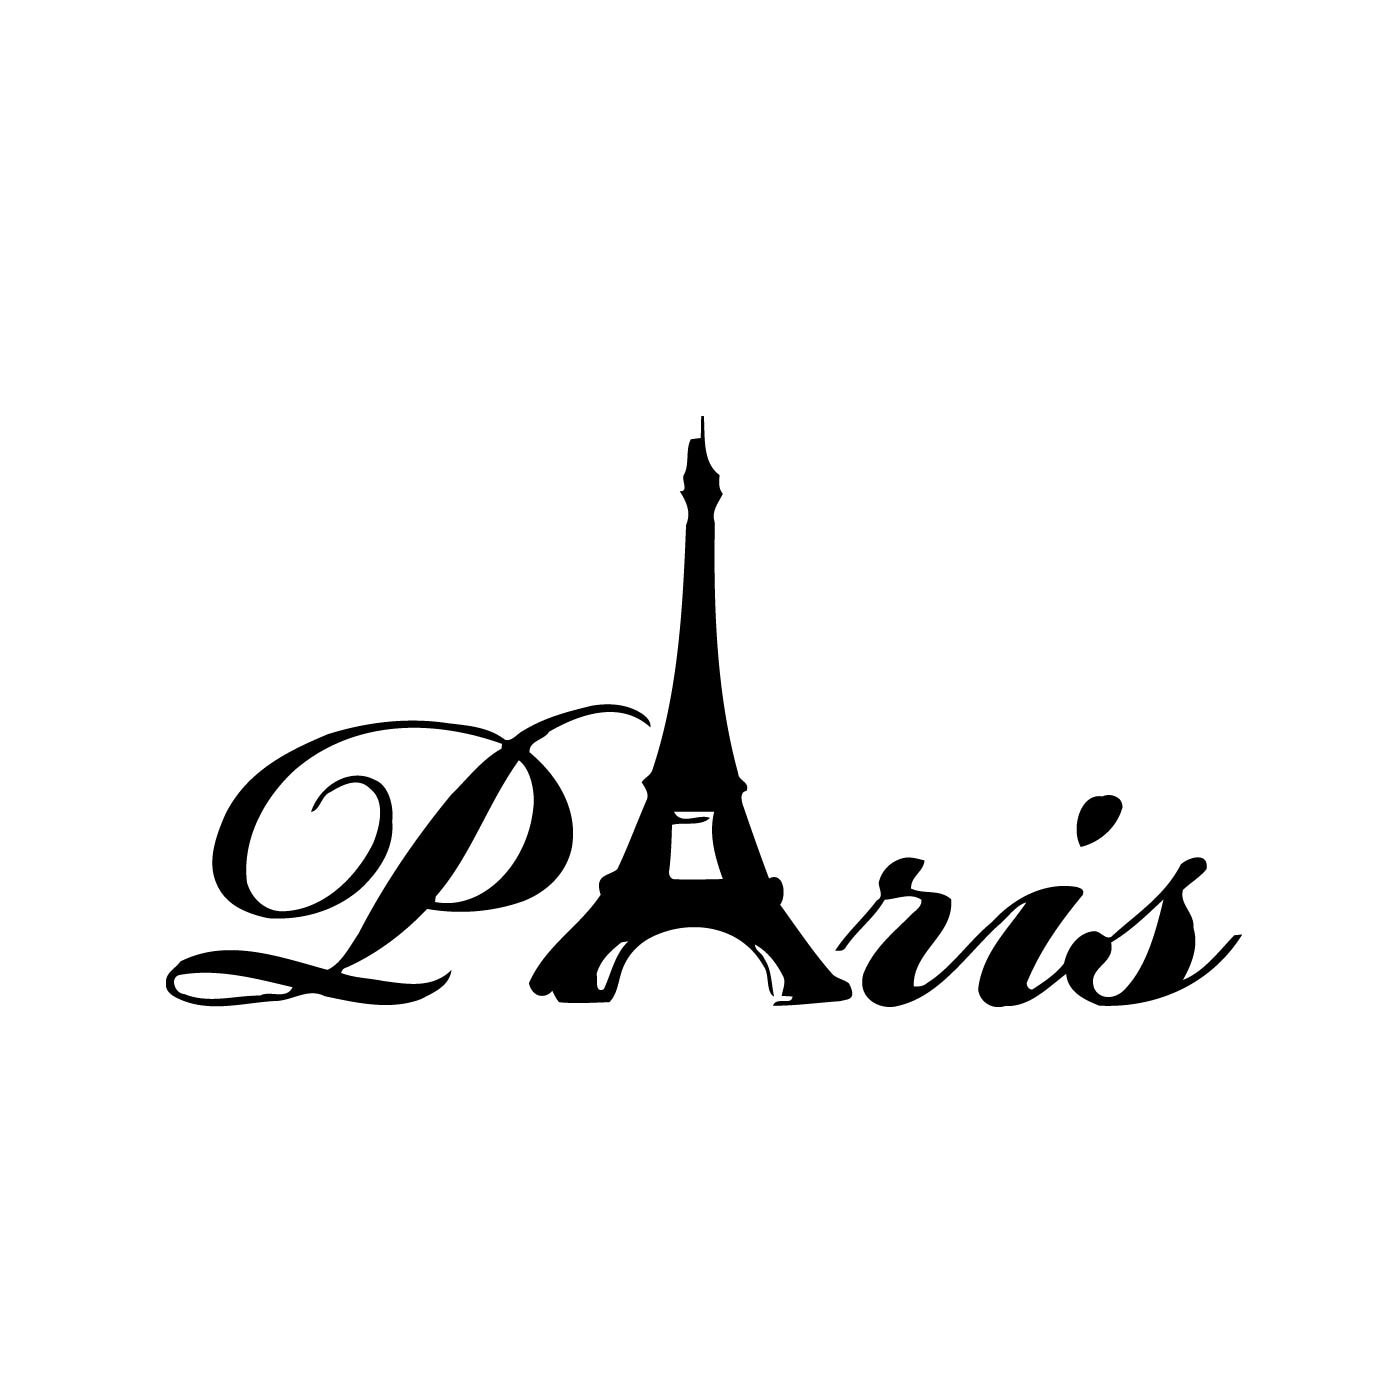 Details about   Sunny Day Eiffel Tower autumn Paris Smashed Wall Art Print Vinyl Sticker AE111 